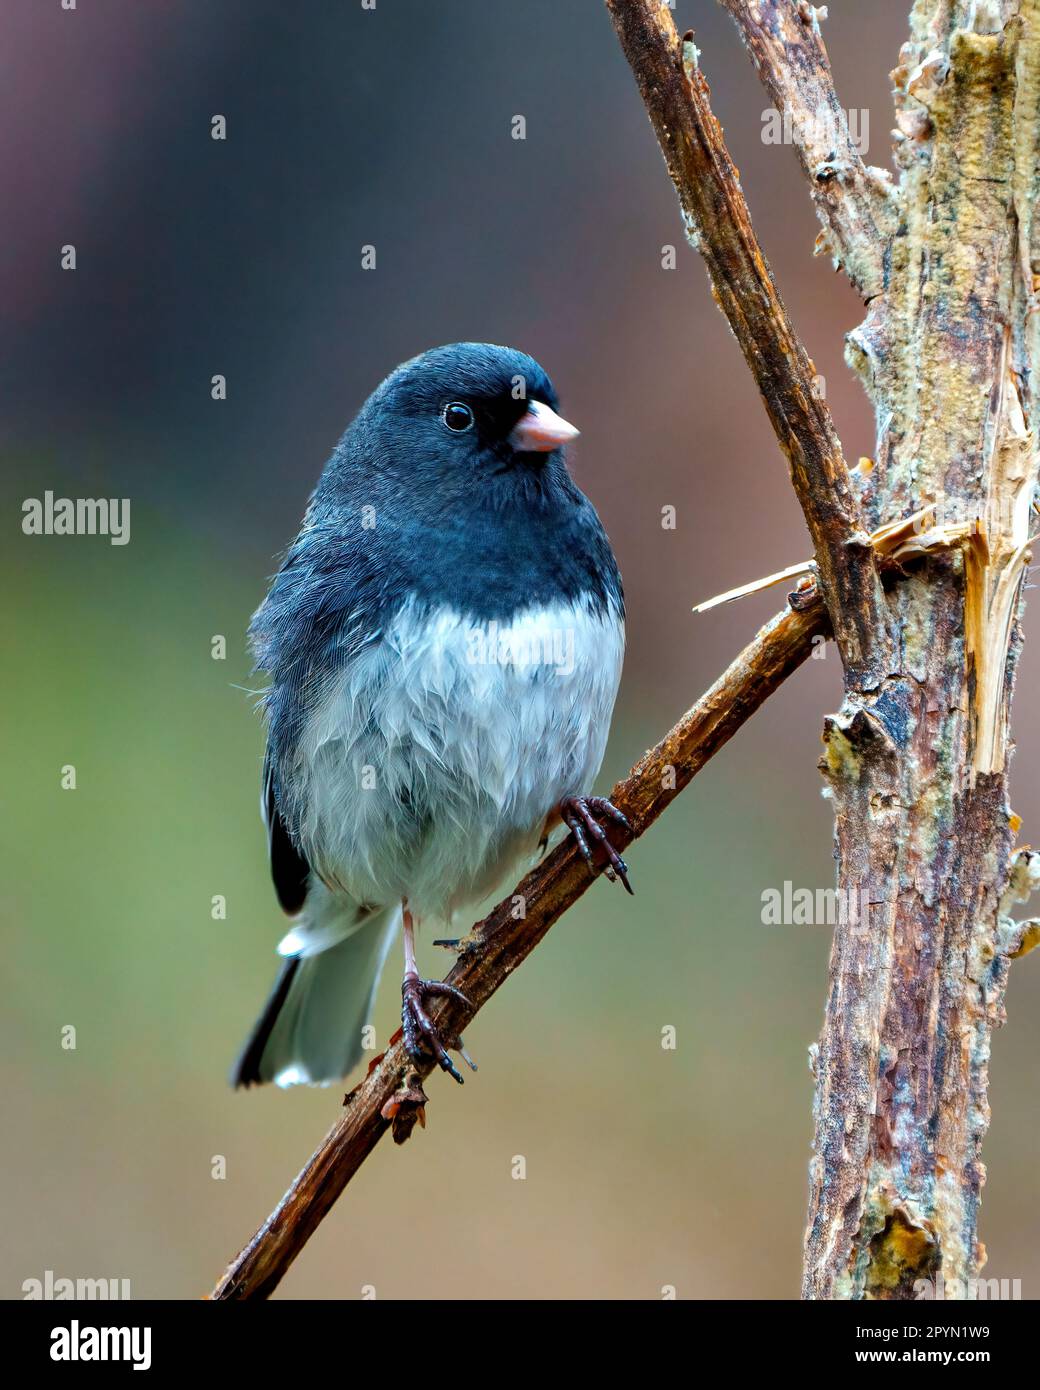 Junco close-up front view perched on a twig with a blur coloured background in its environment and habitat surrounding. Dark-eyed Junco Picture. Stock Photo